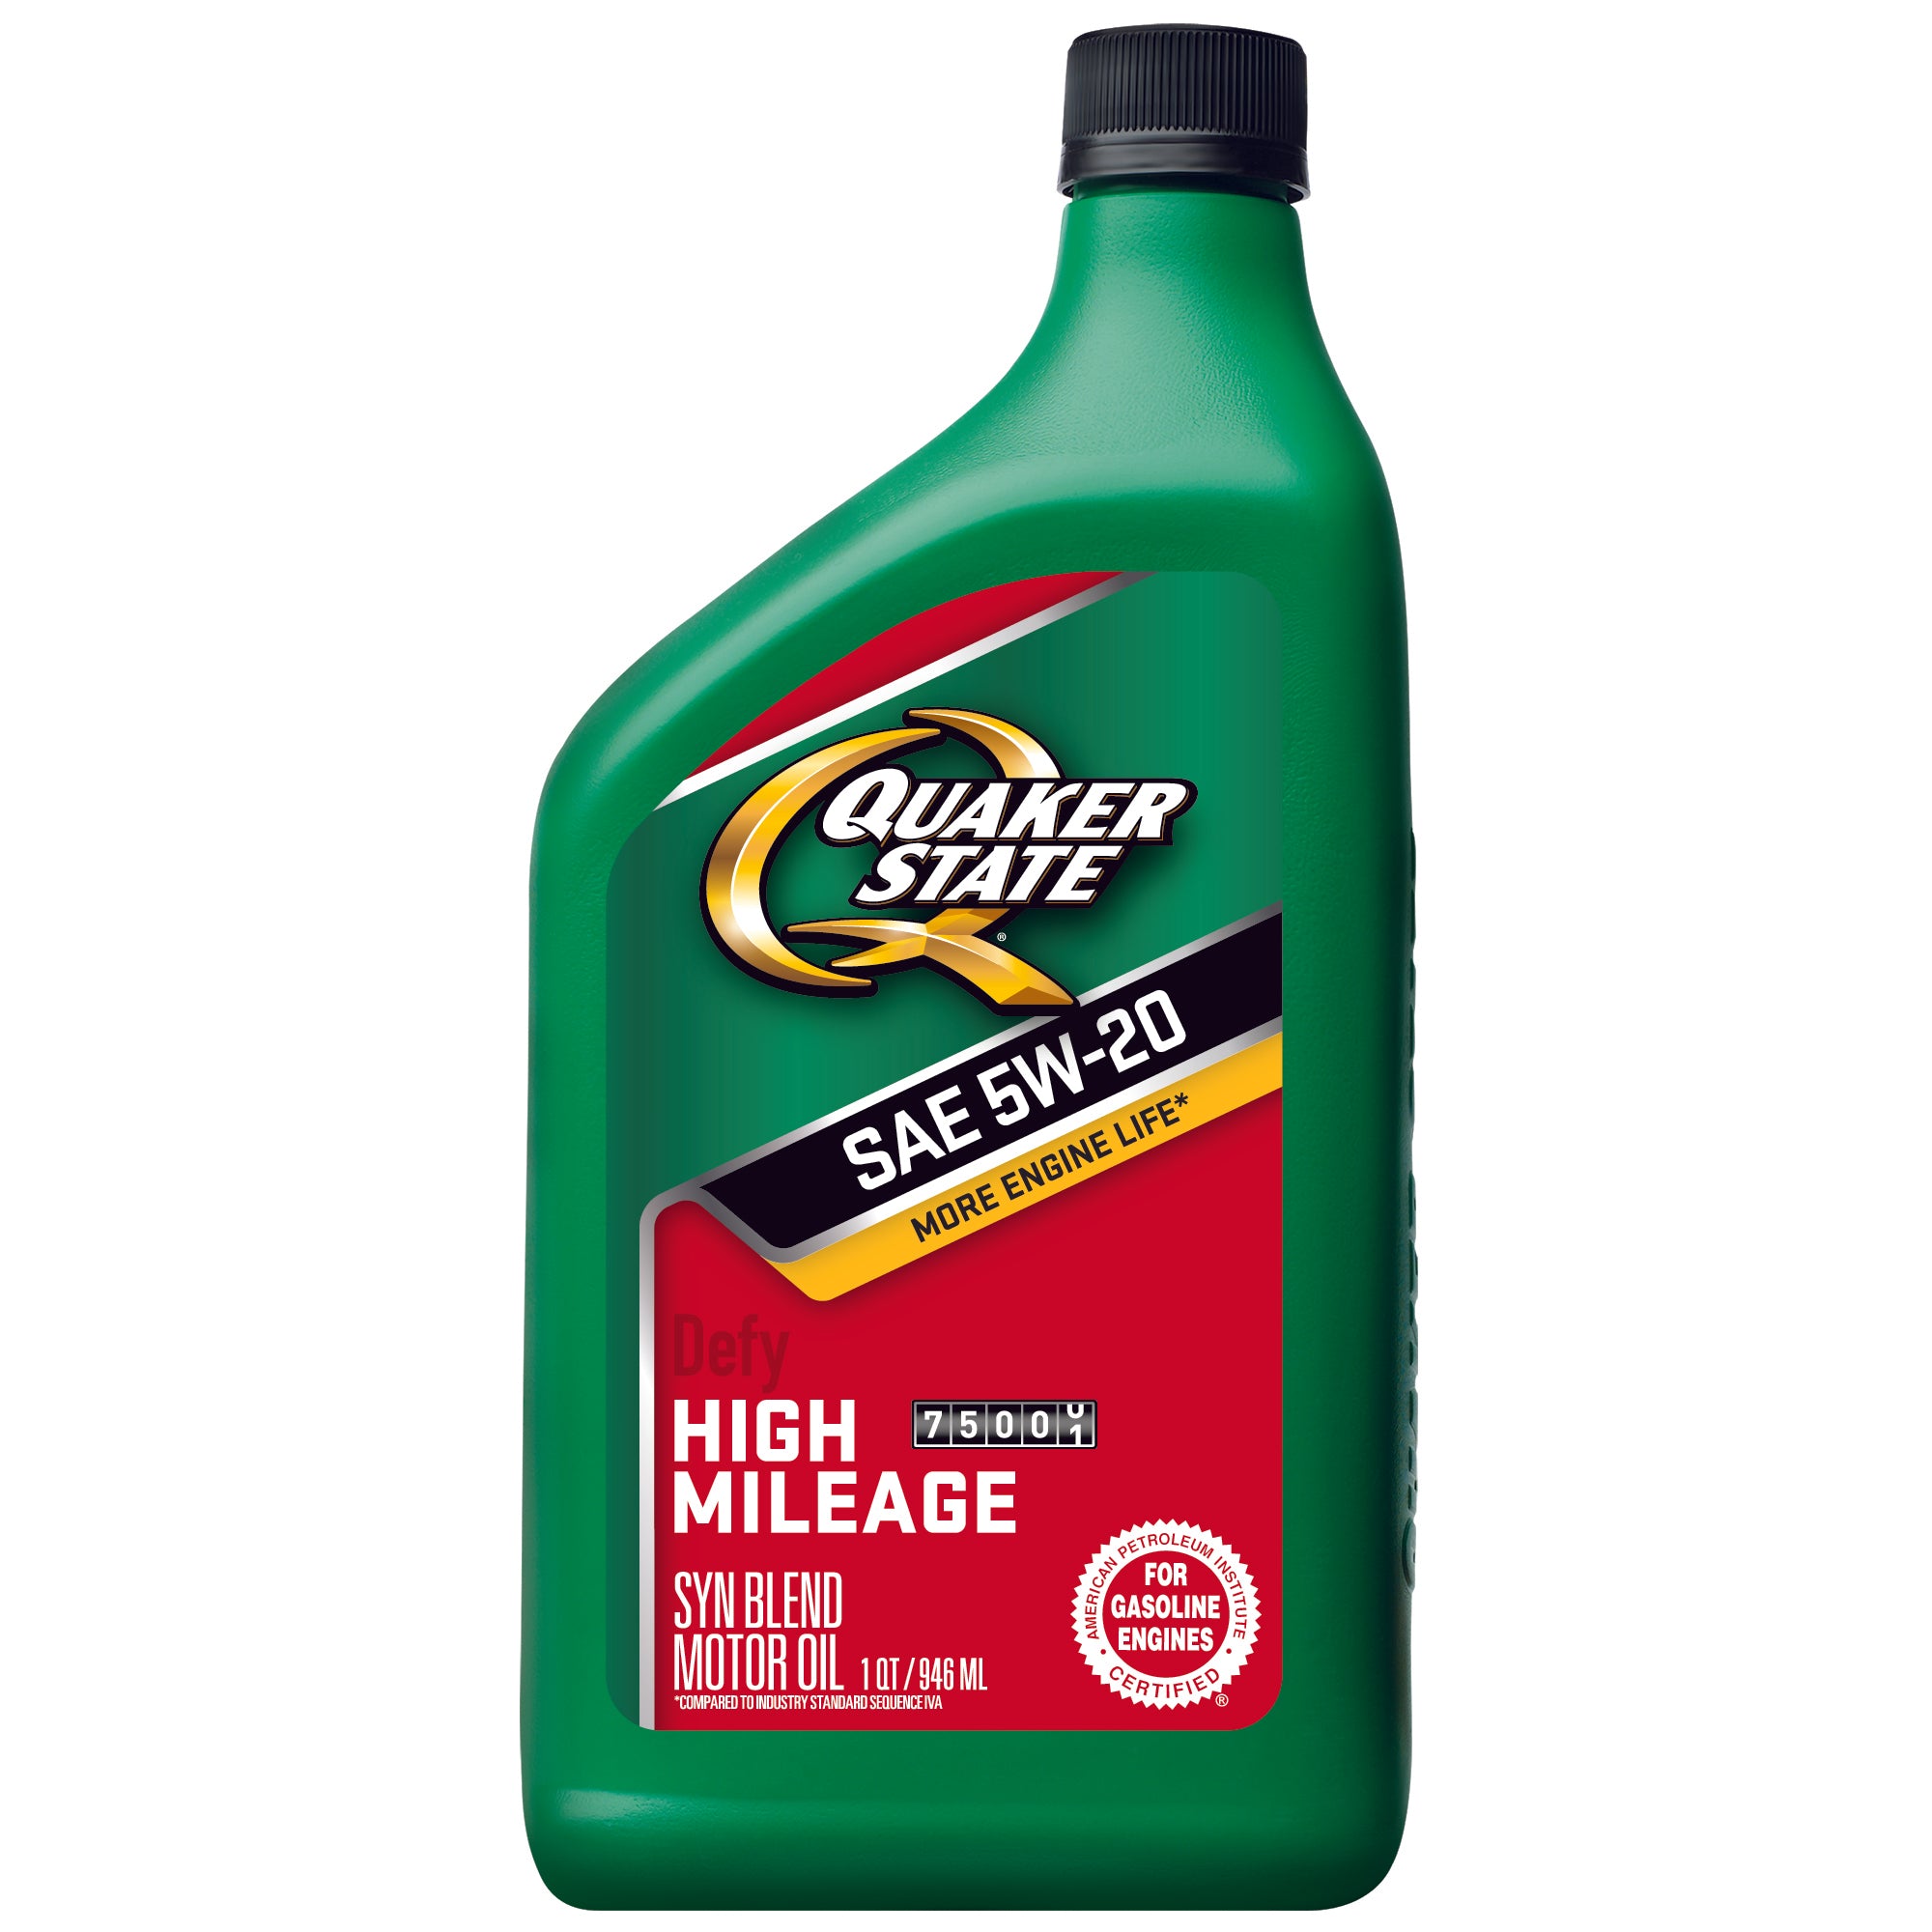 Quaker State Defy 5W 20 Synthetic Blend Motor Oil Case of 6 1 qt